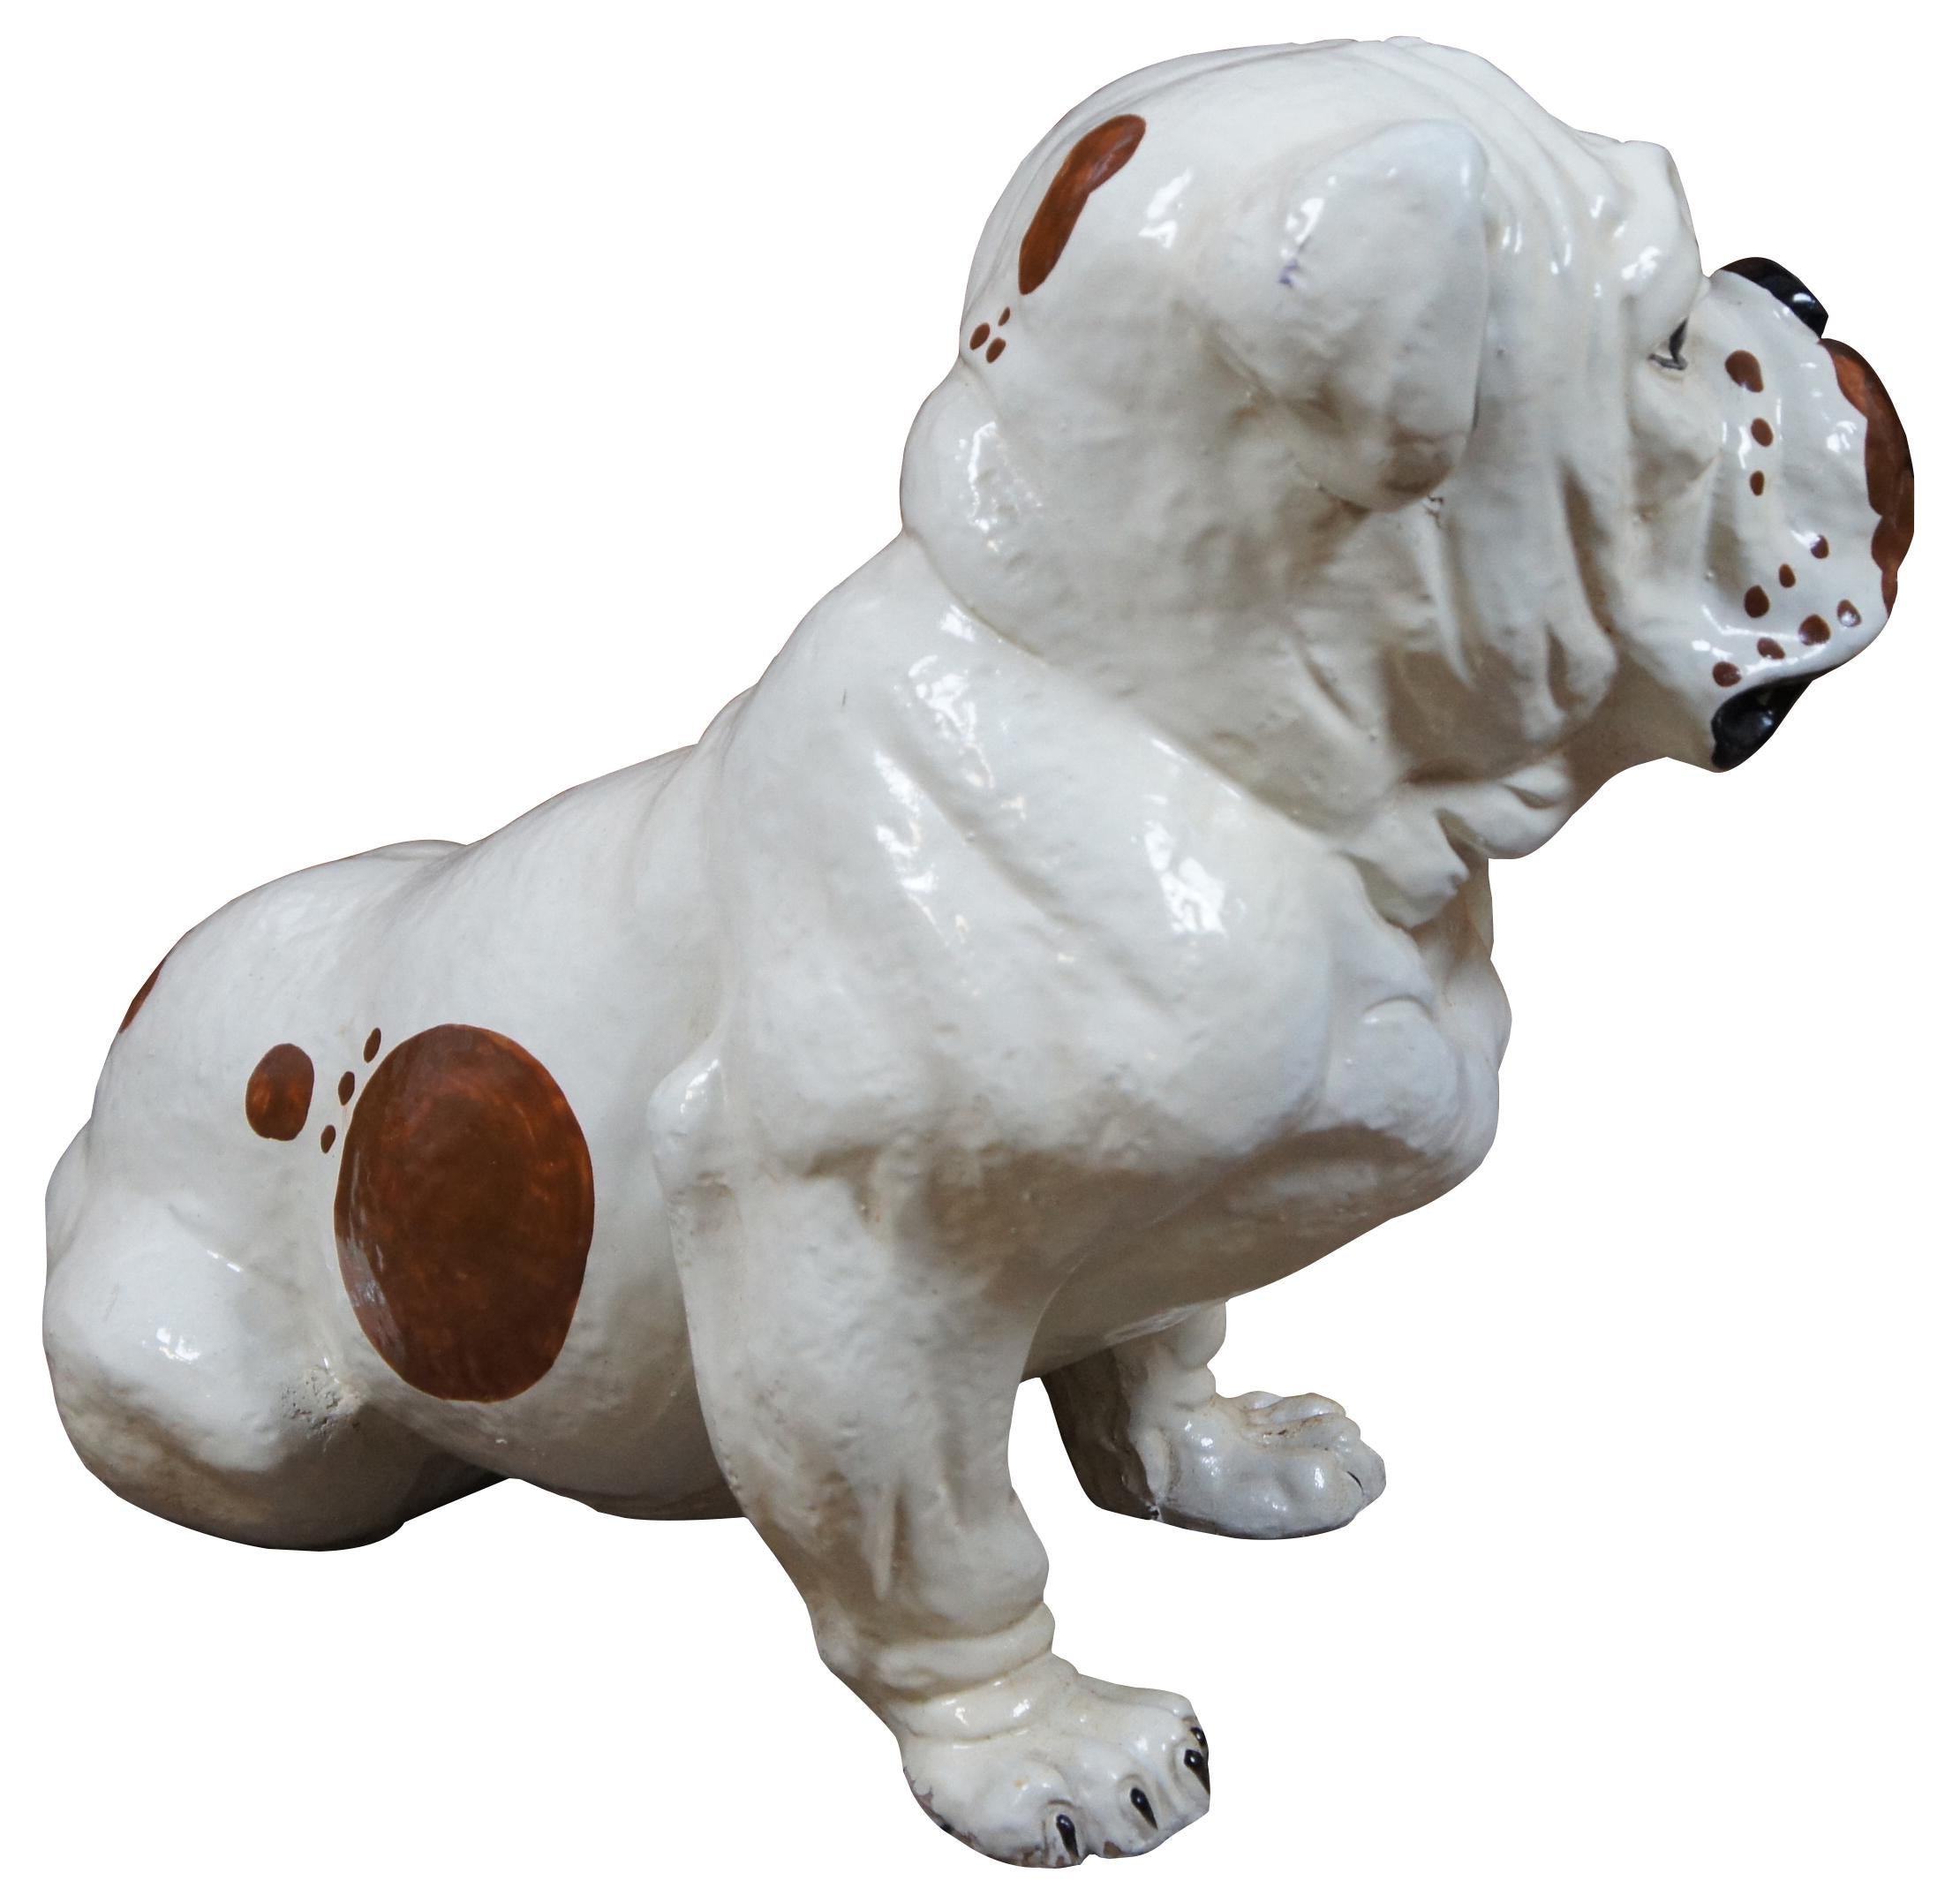 Life size vintage 1960s Marwal Ind. Inc chalkware English bulldog shaped sculpture or door stop painted in white with brown spots. Measure: 19